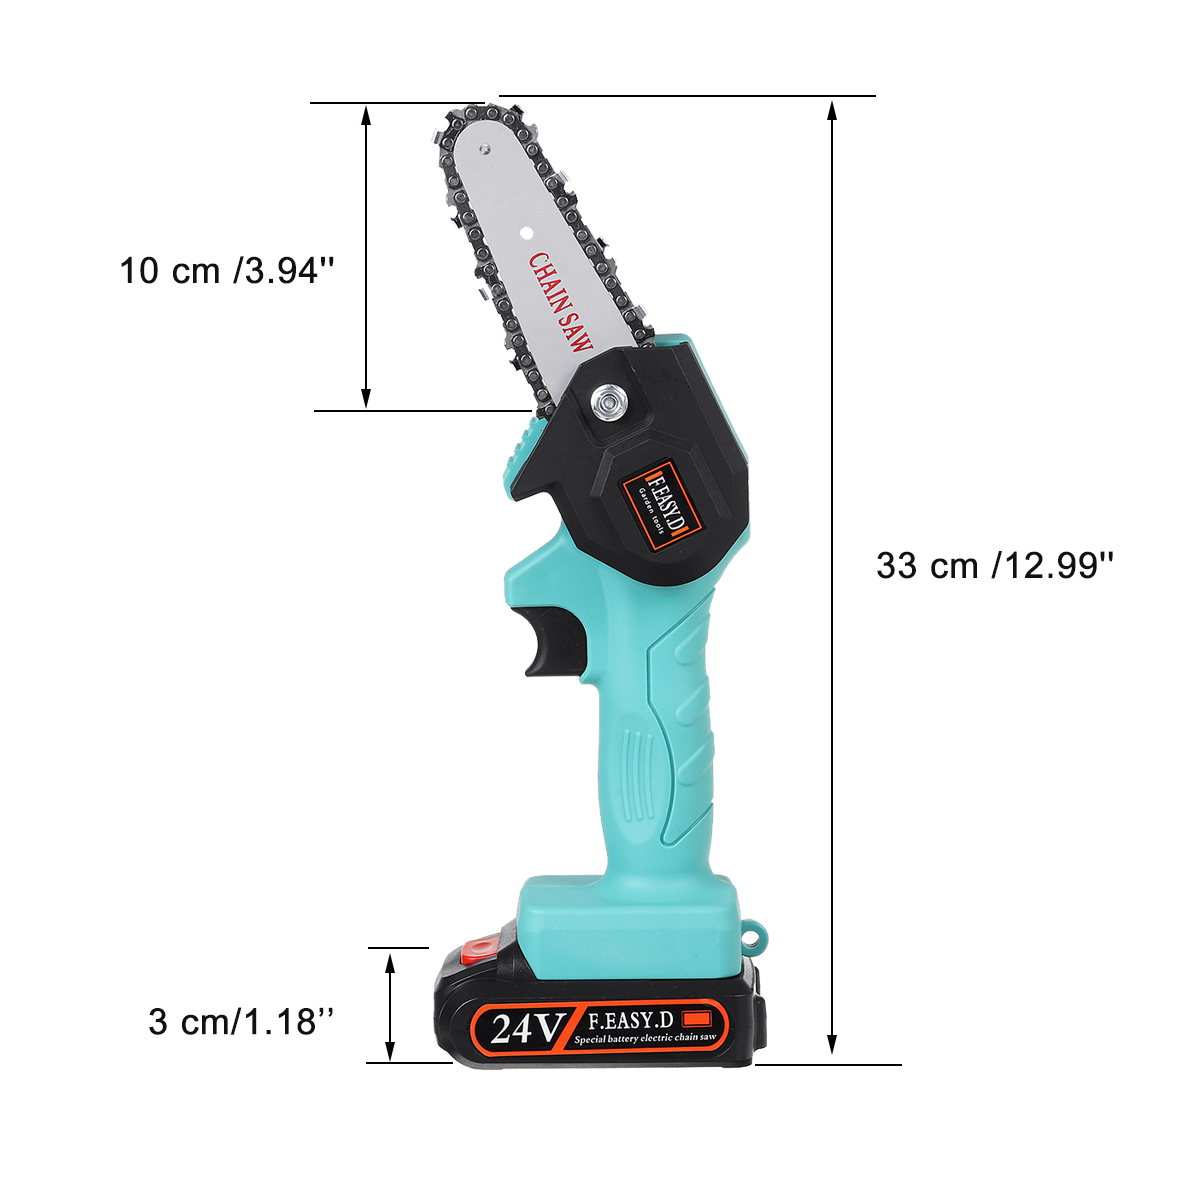 24V-550W-Rechargeable-Mini-Electric-Chainsaw-Handheld-Wood-Pruning-Saw-Kit-1777015-12